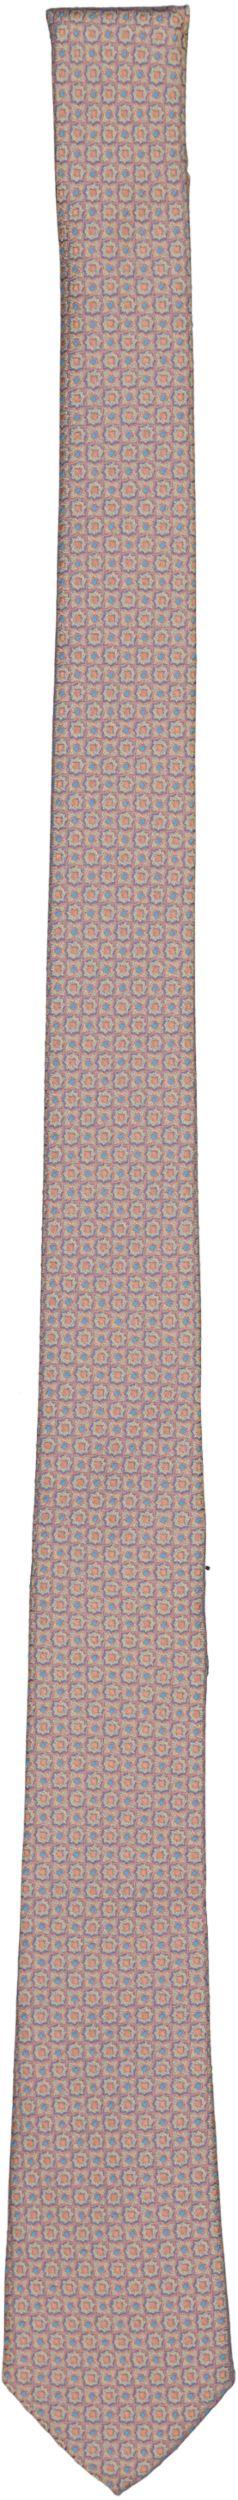 T.O. Collection Mens Necktie - TO268